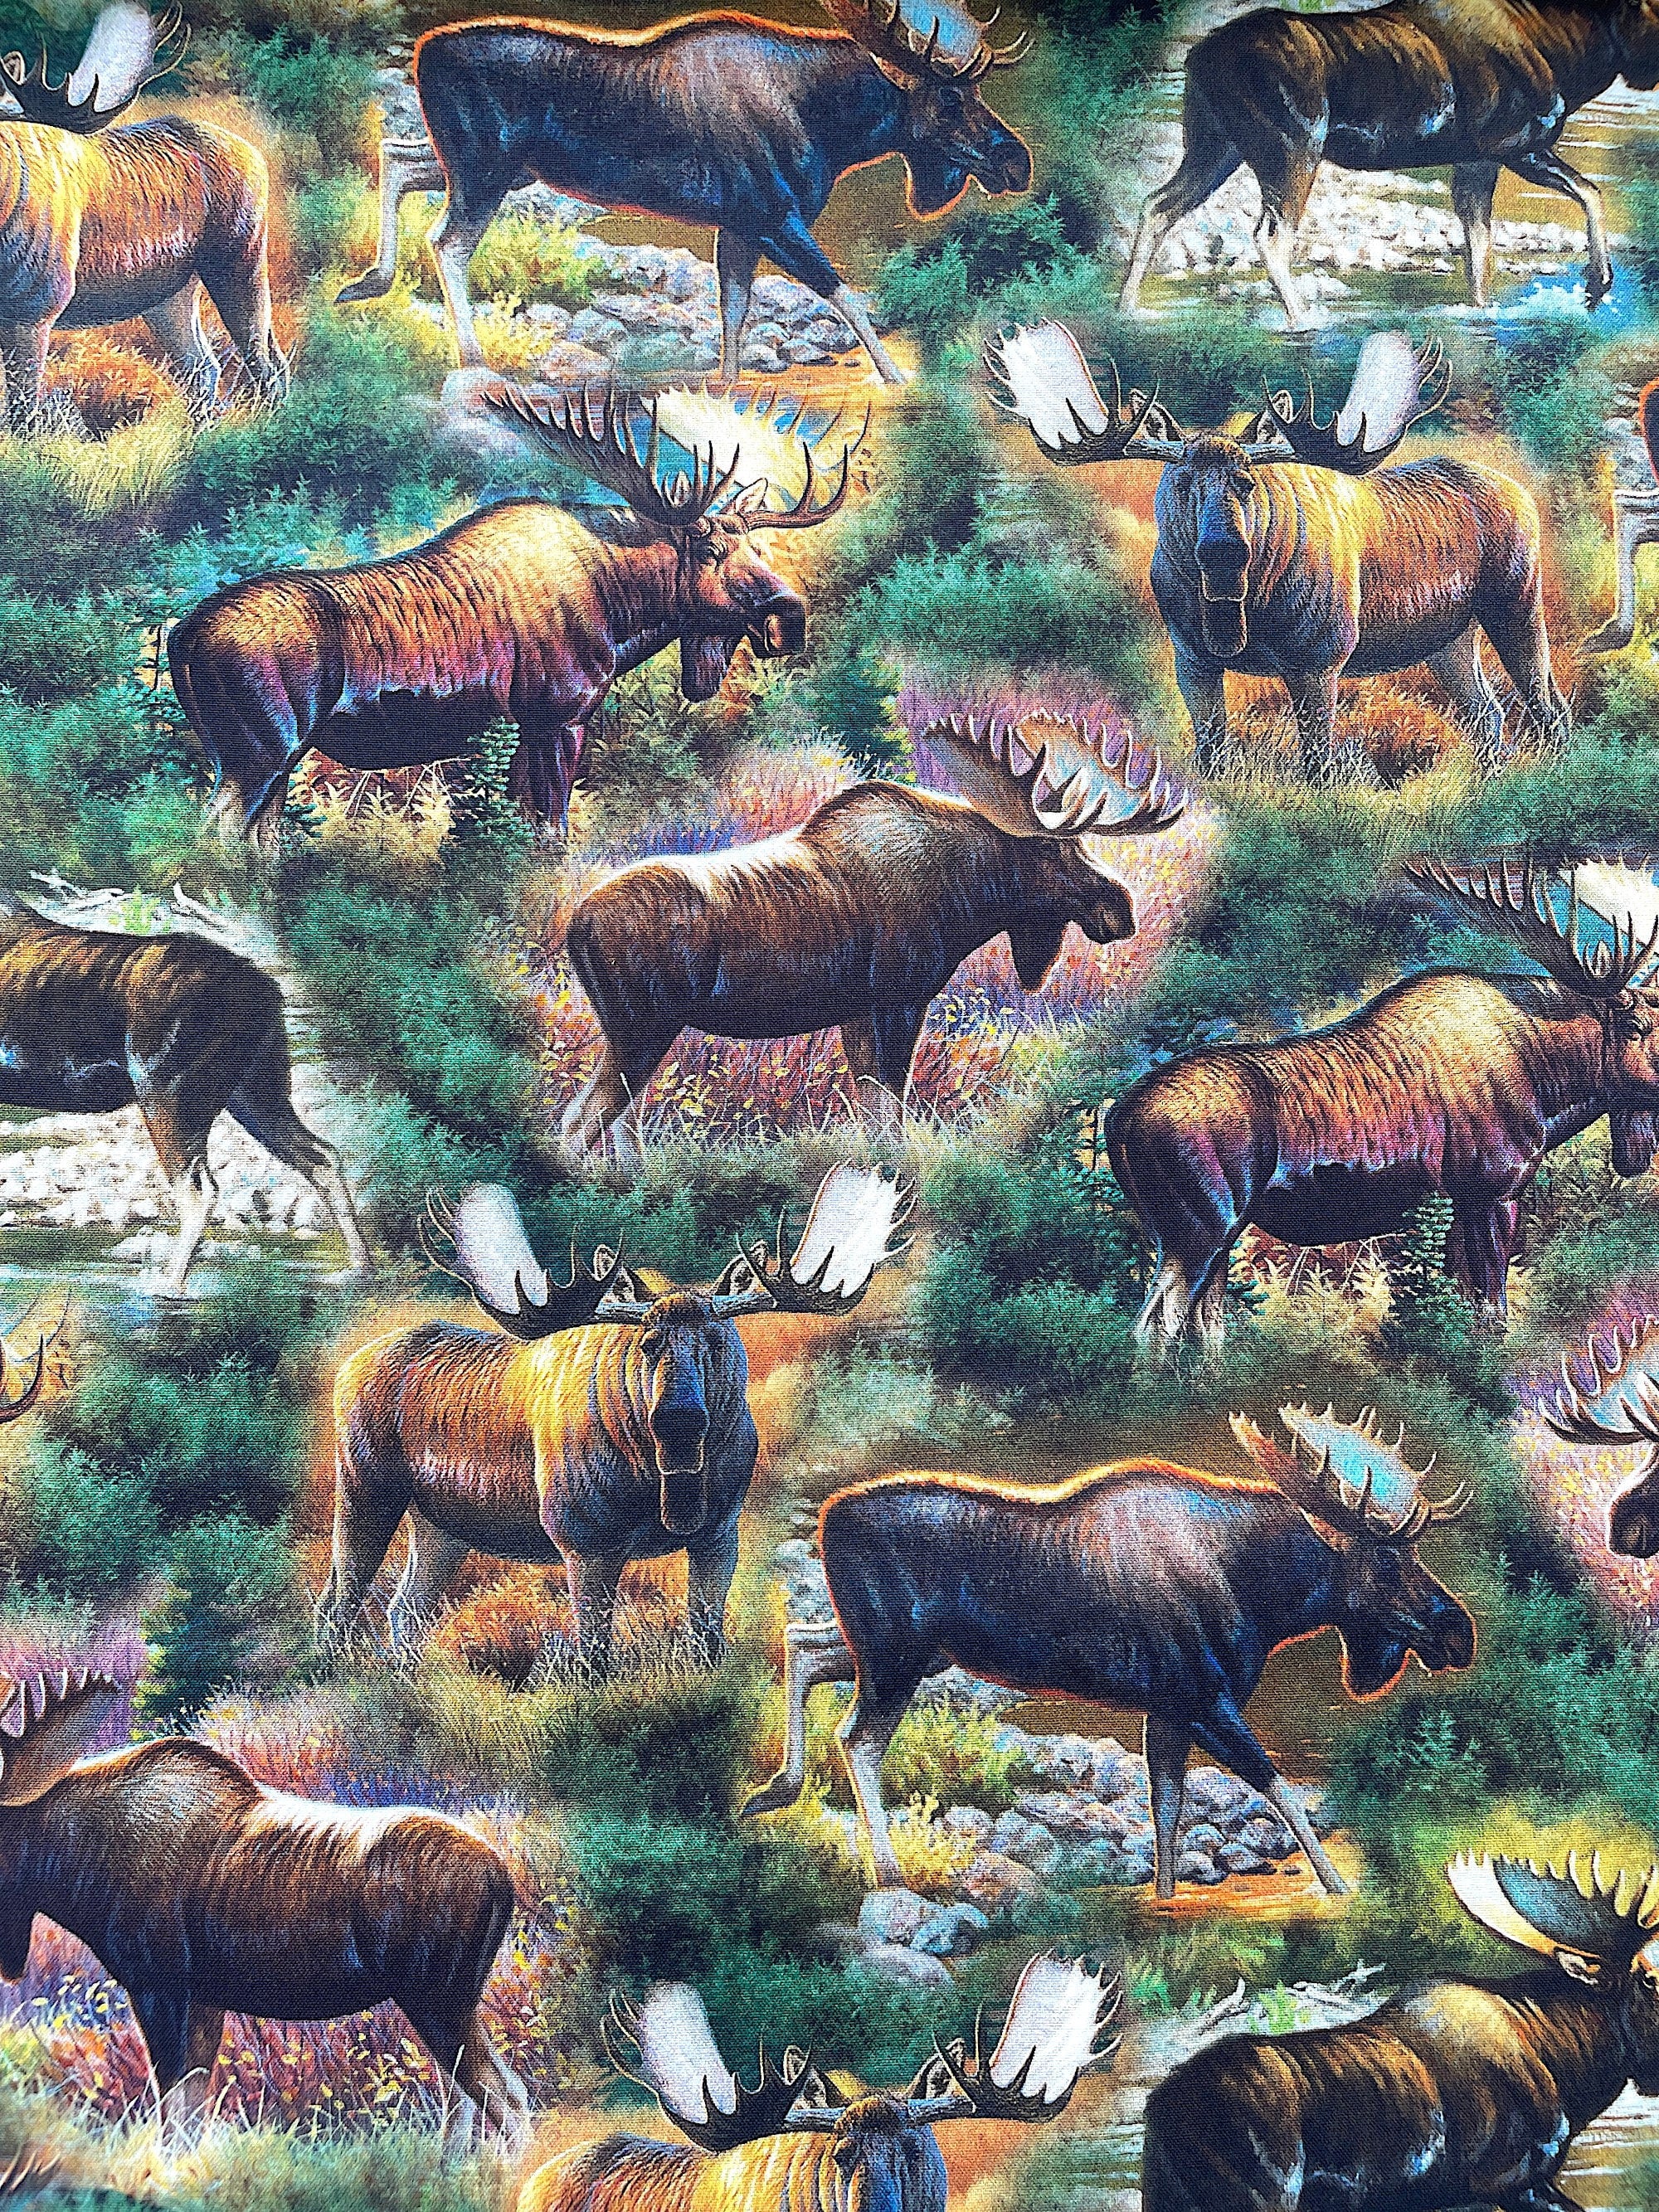 This fabric is called Moose Scenic and is part of the Magnificent Moose collection by QT fabrics. This cotton fabric is covered with moose walking in the grass and in water.